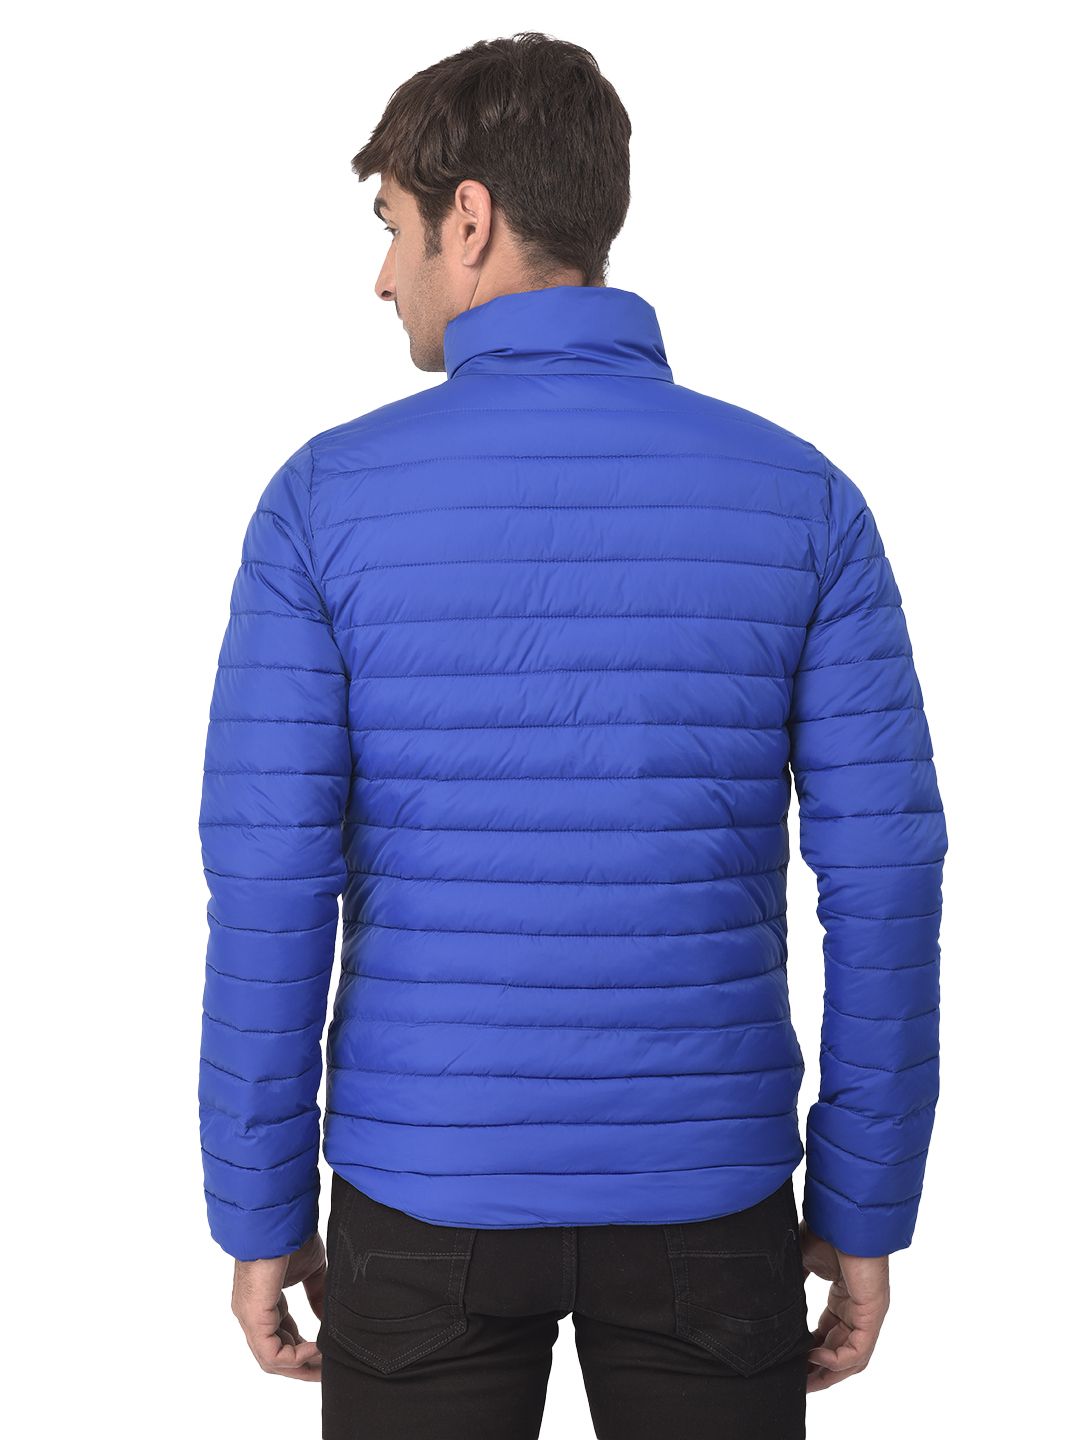 Dazzling blue quilted jacket